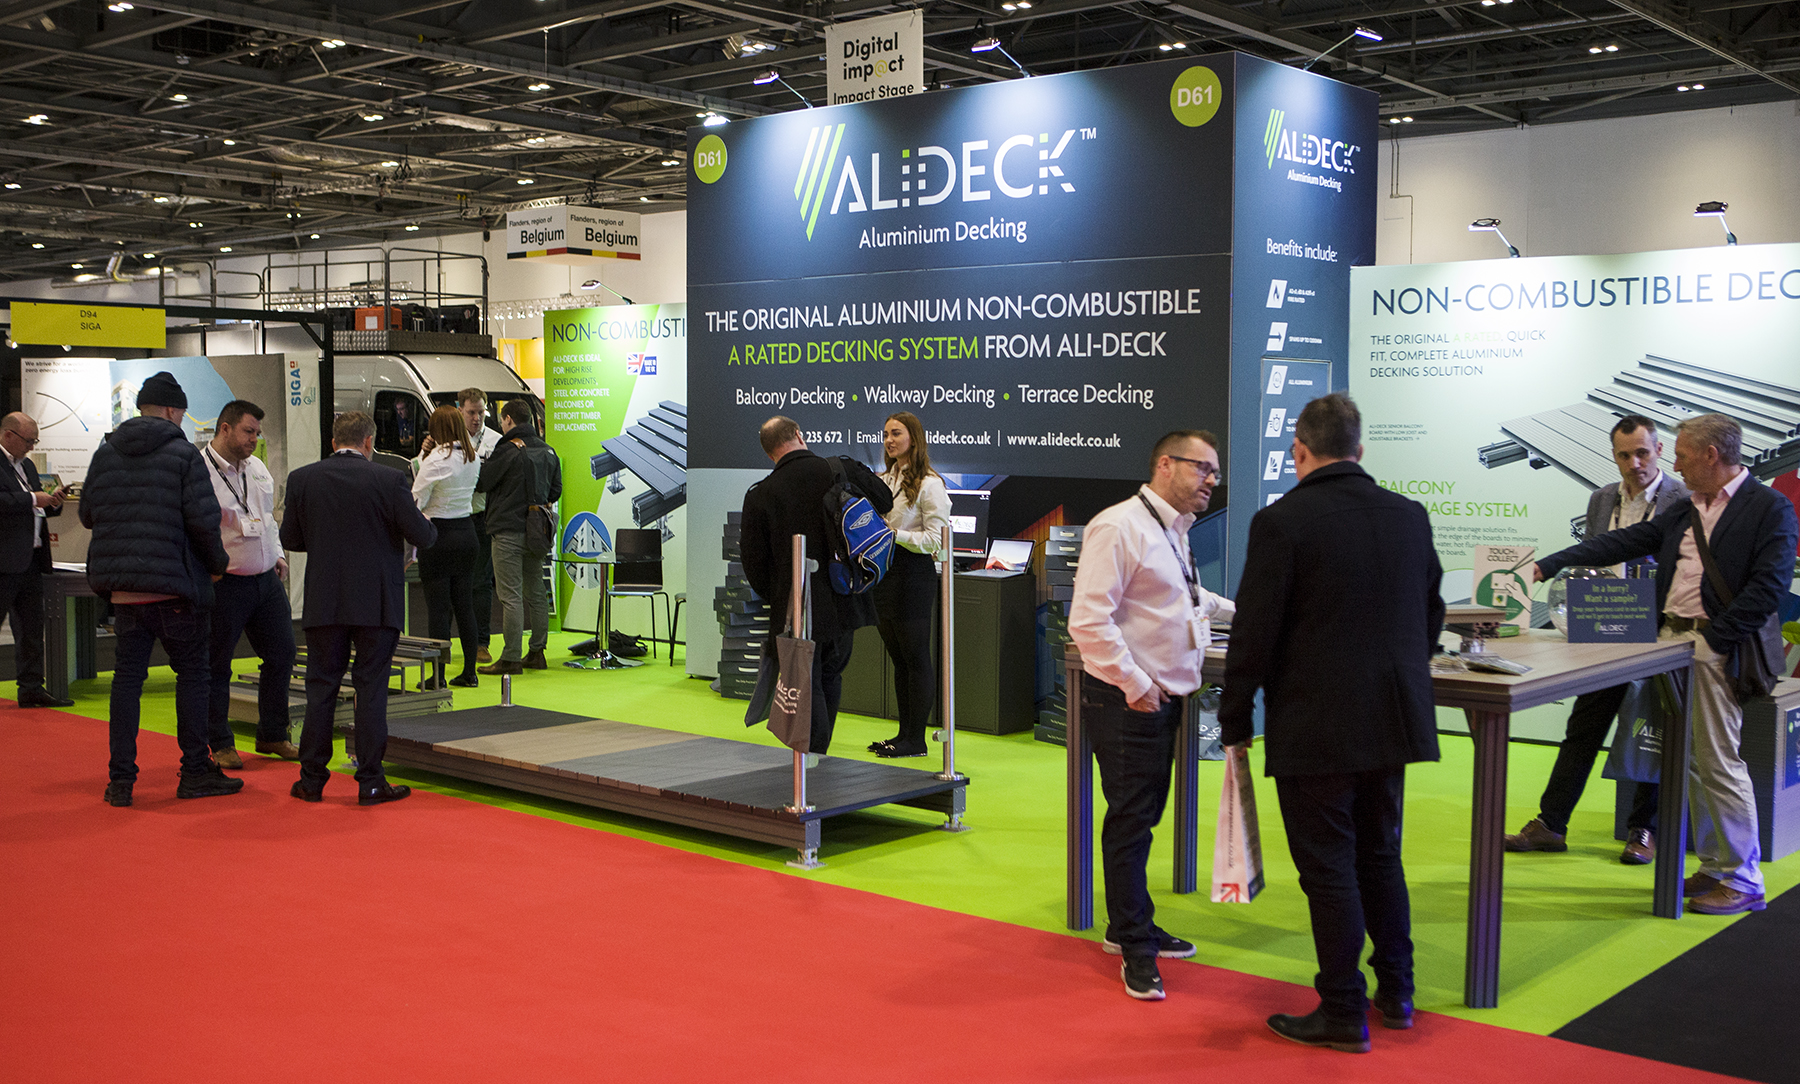 A great first day at Futurebuild 2020 for the AliDeck team as they showcase the full range of AliDeck aluminium decking products.